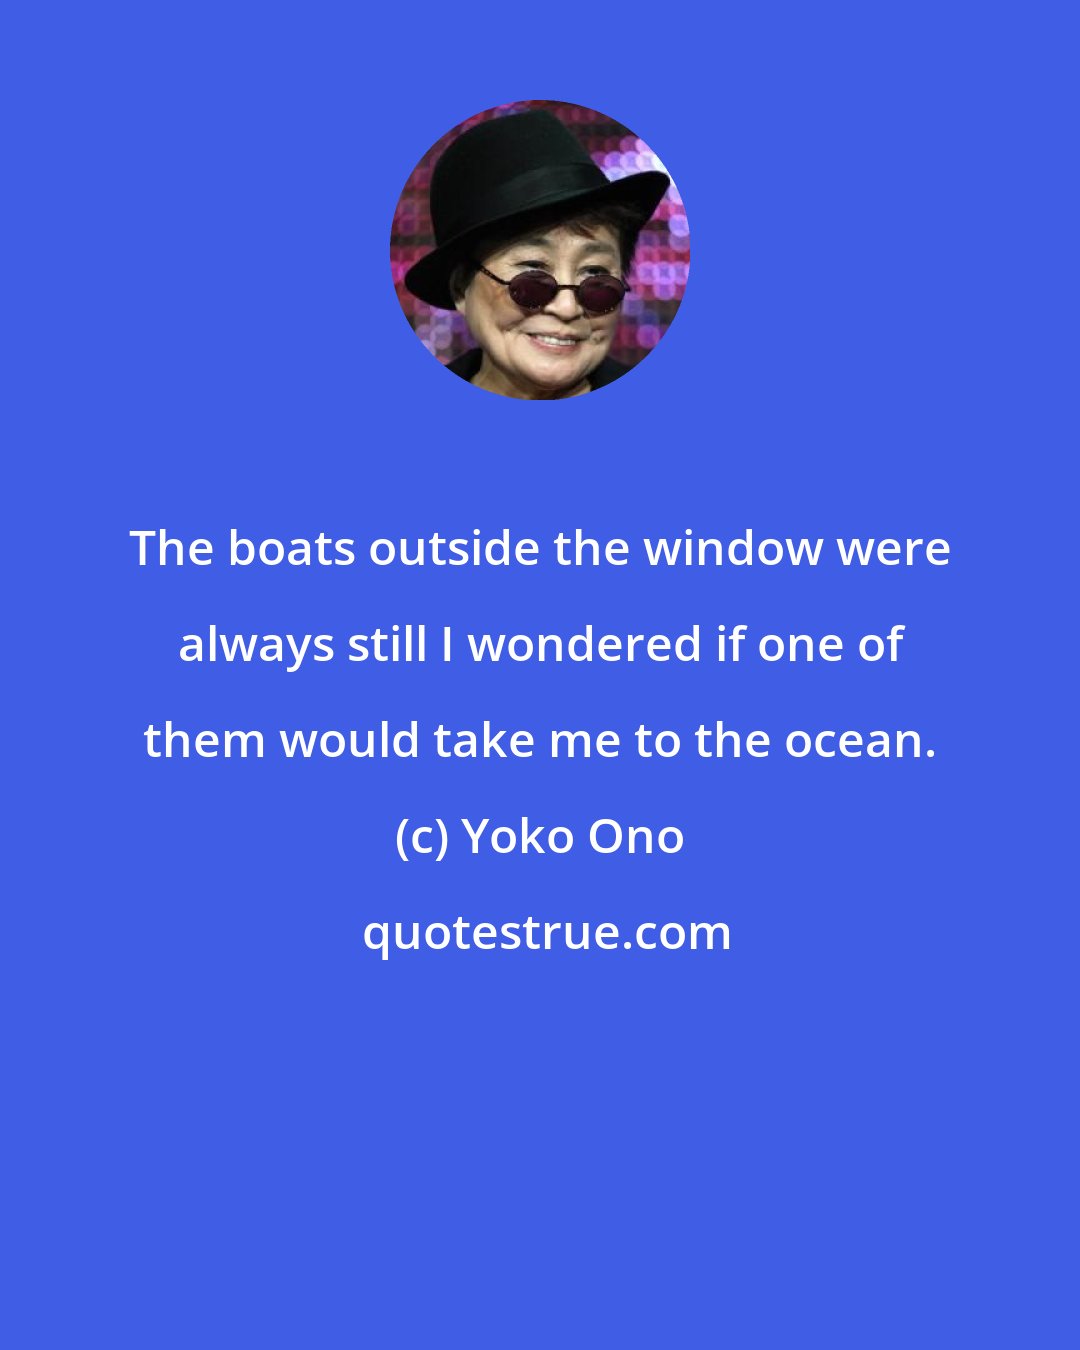 Yoko Ono: The boats outside the window were always still I wondered if one of them would take me to the ocean.